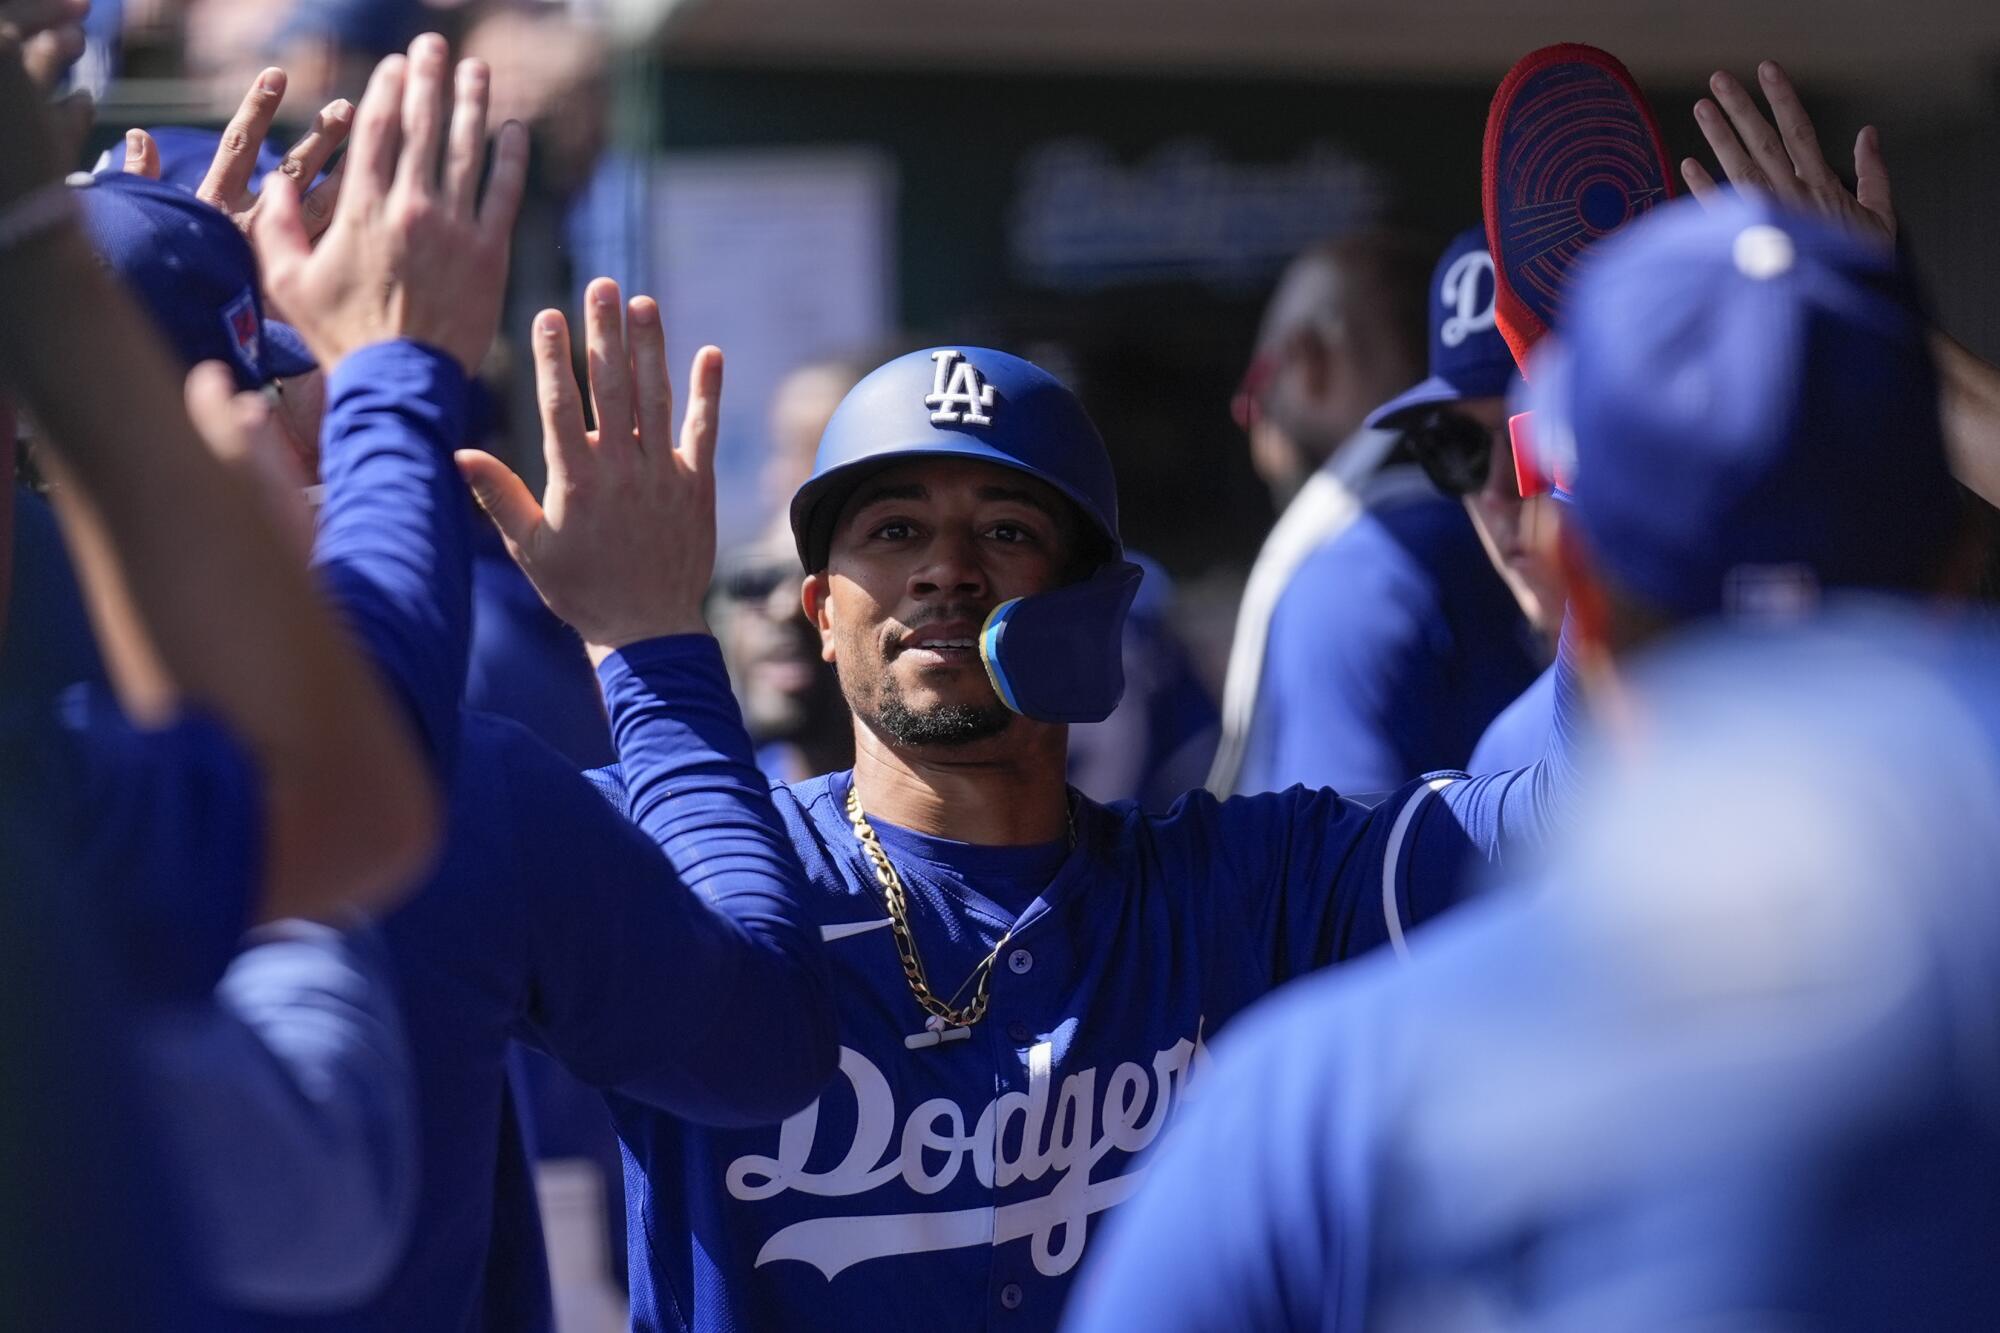 The Dodgers' Mookie Betts high-fives teammates and celebrates after scoring.